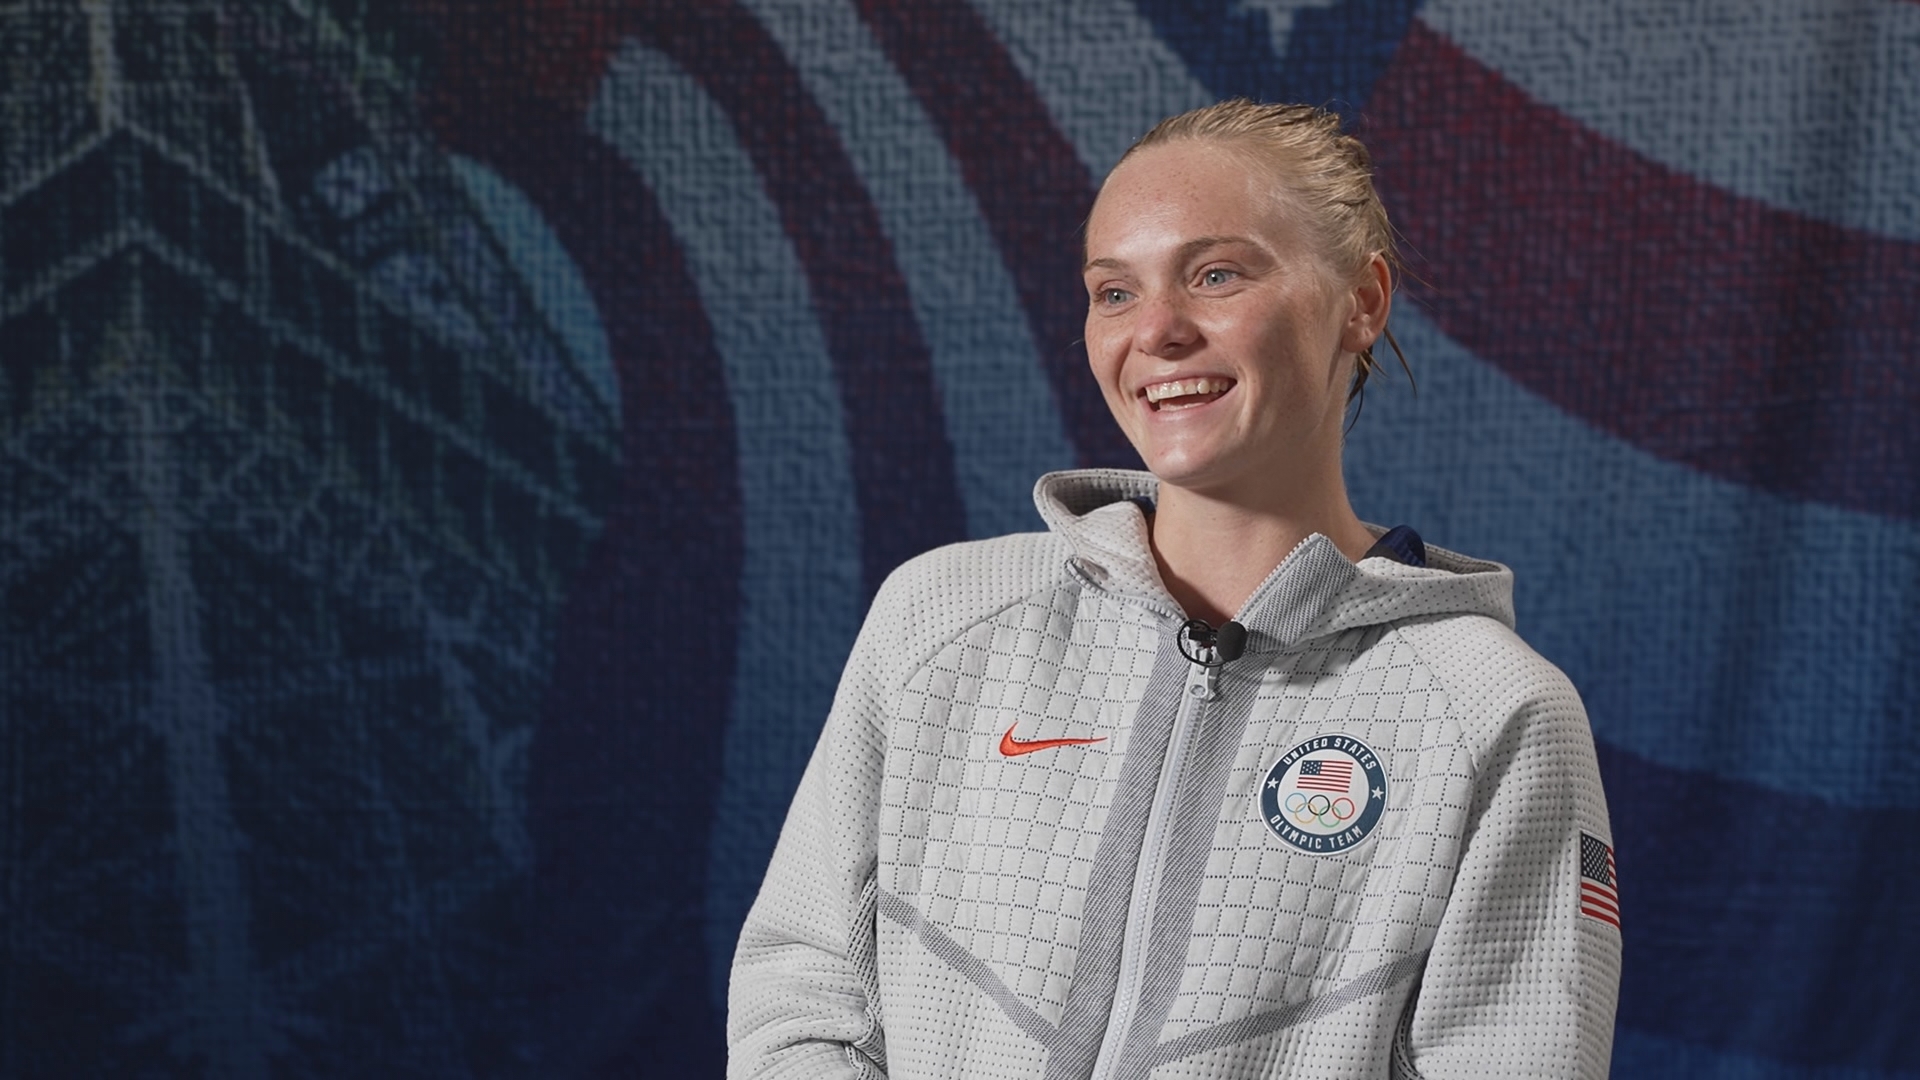 Arizona is representing several athletes competing in the Paris Olympics. This includes Delaney Schnell, looking to medal for the second straight Olympic games.